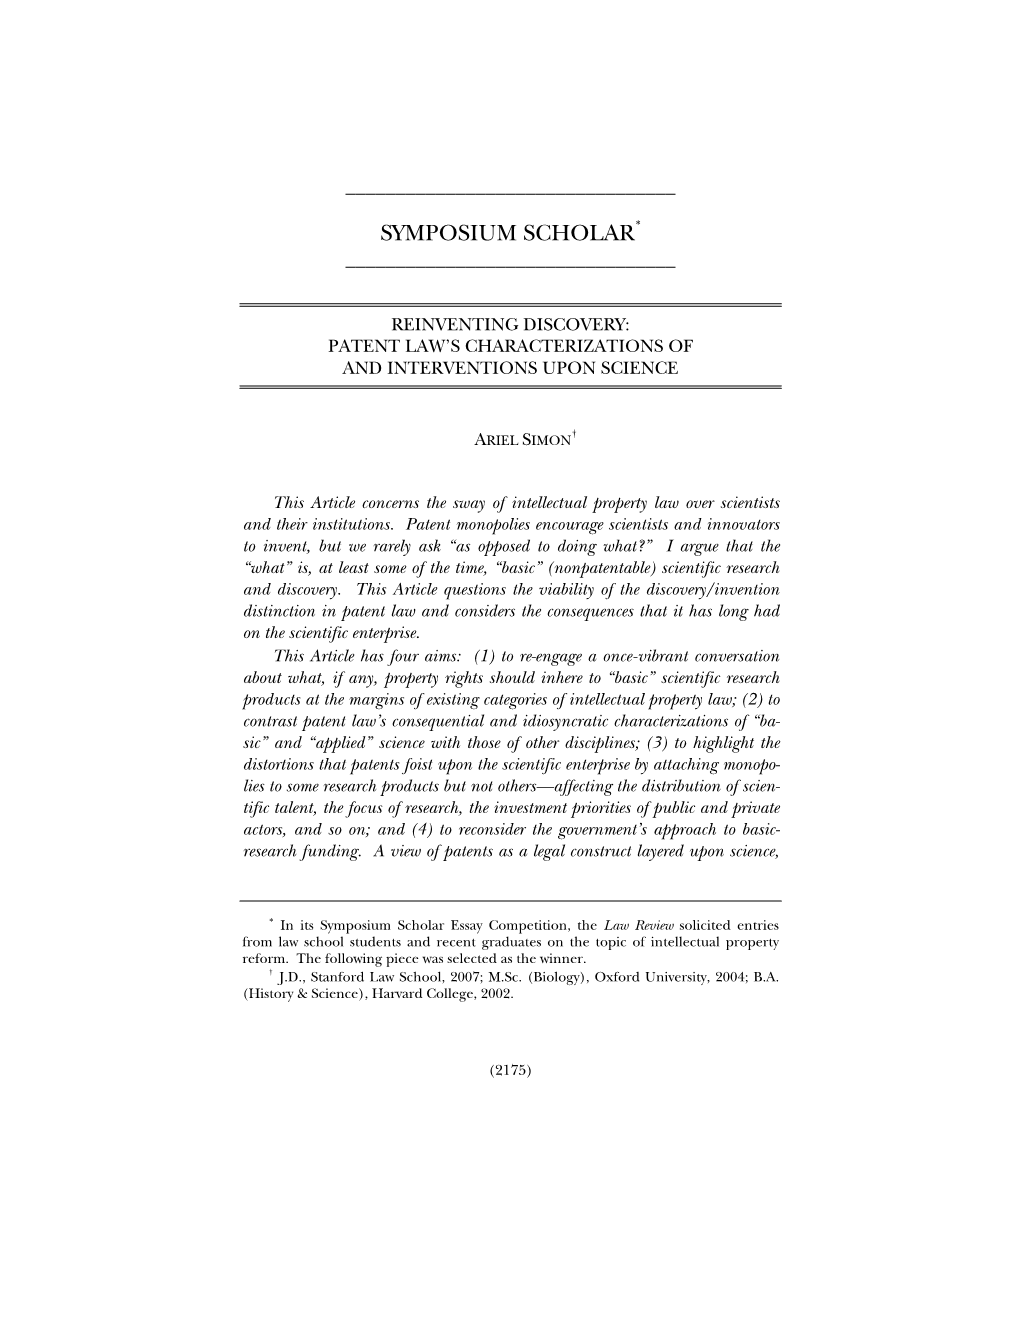 Reinventing Discovery: Patent Law’S Characterizations of and Interventions Upon Science